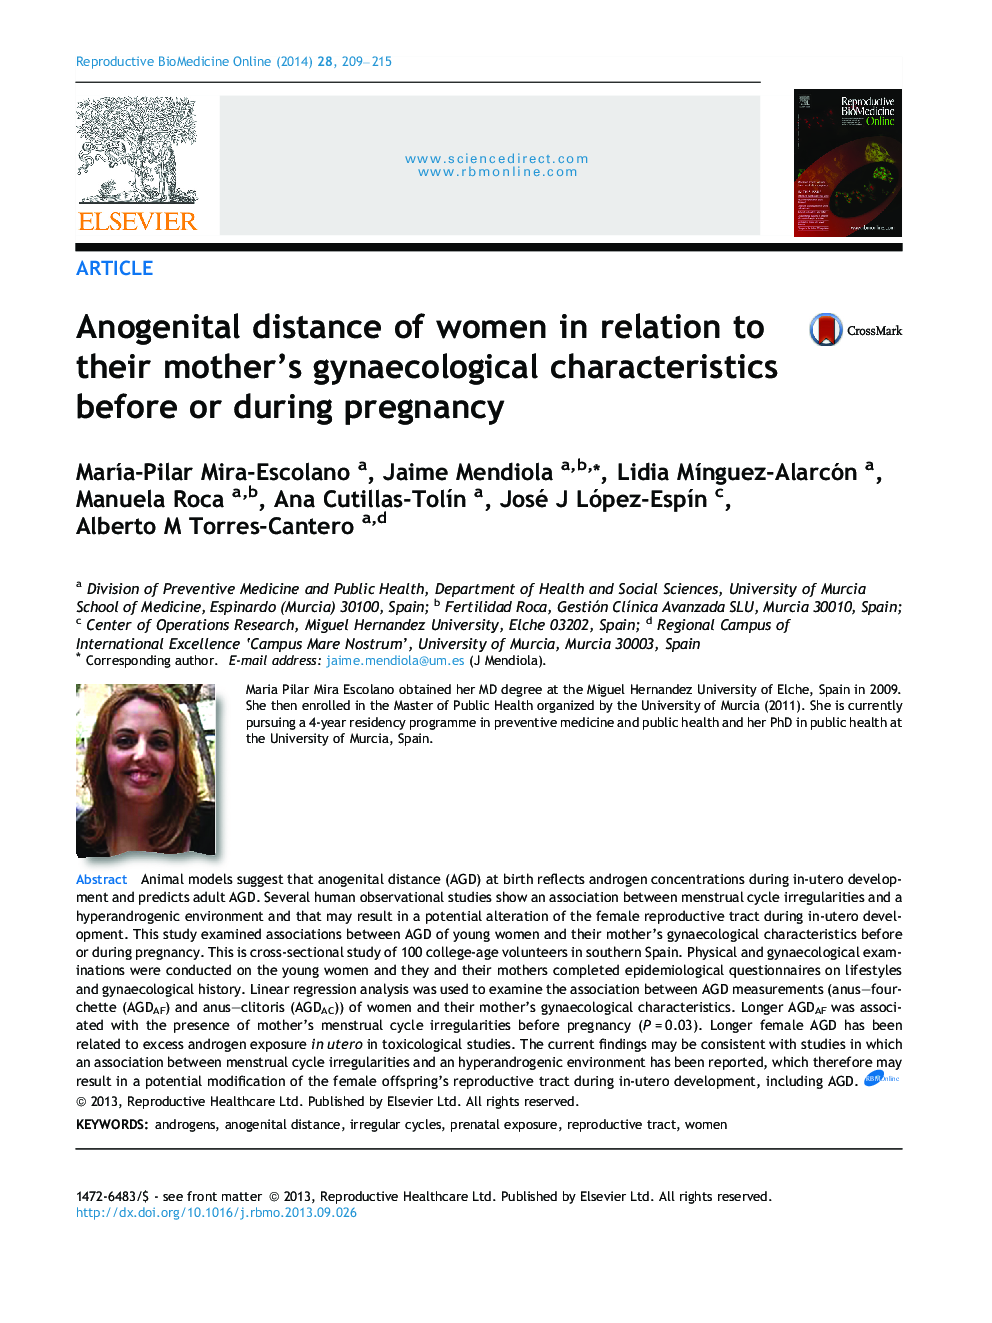 Anogenital distance of women in relation to their mother’s gynaecological characteristics before or during pregnancy 